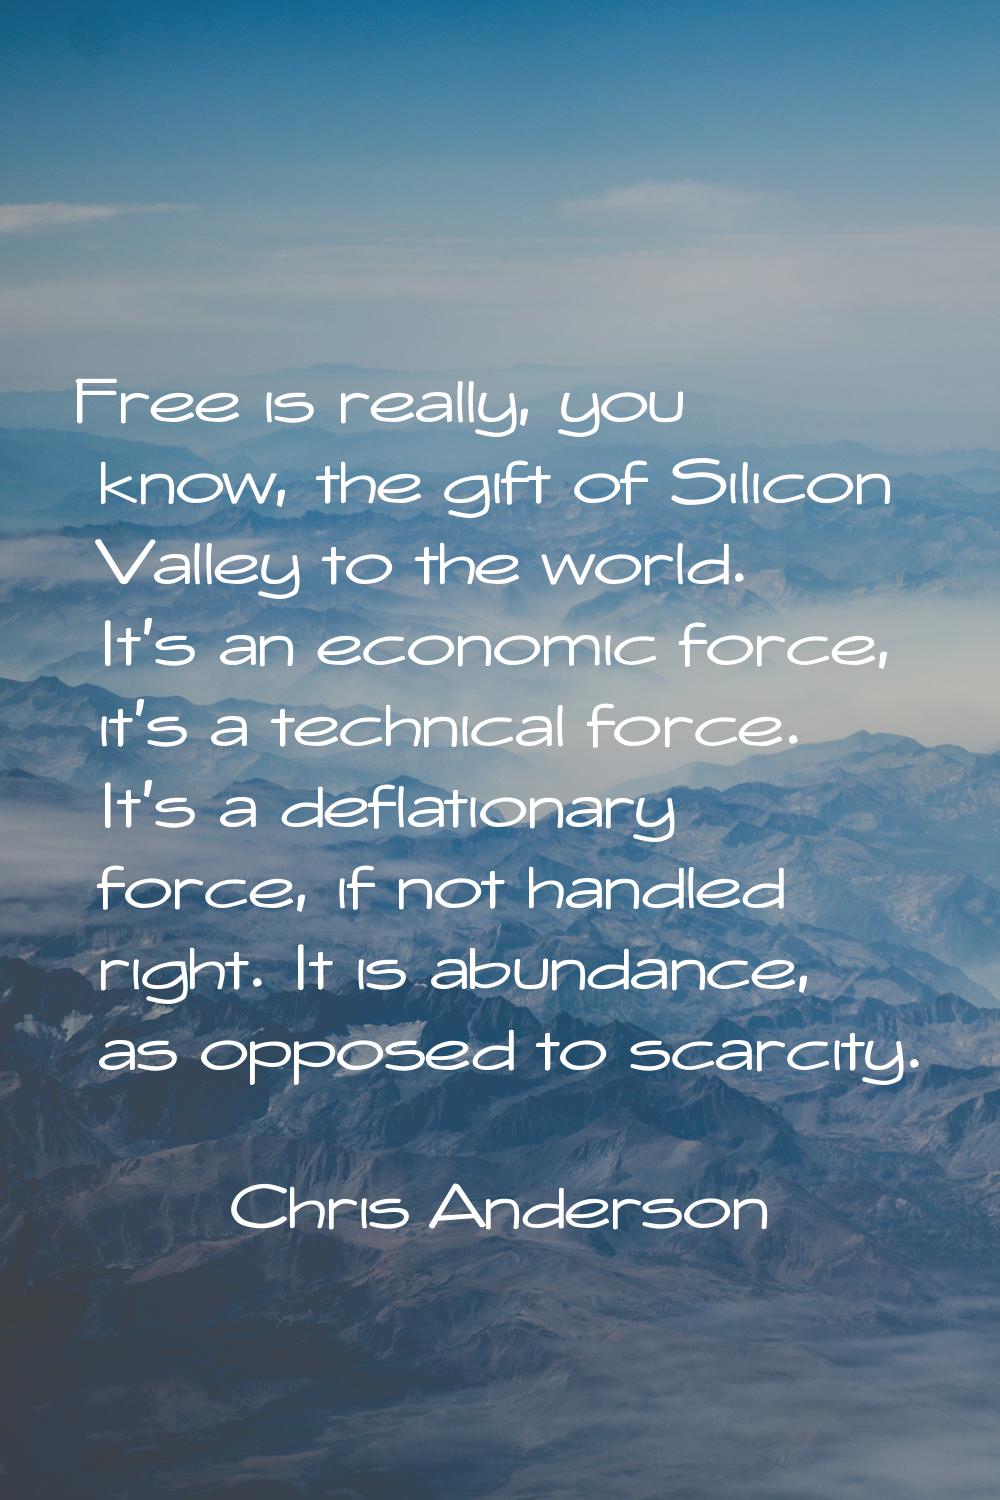 Free is really, you know, the gift of Silicon Valley to the world. It's an economic force, it's a t